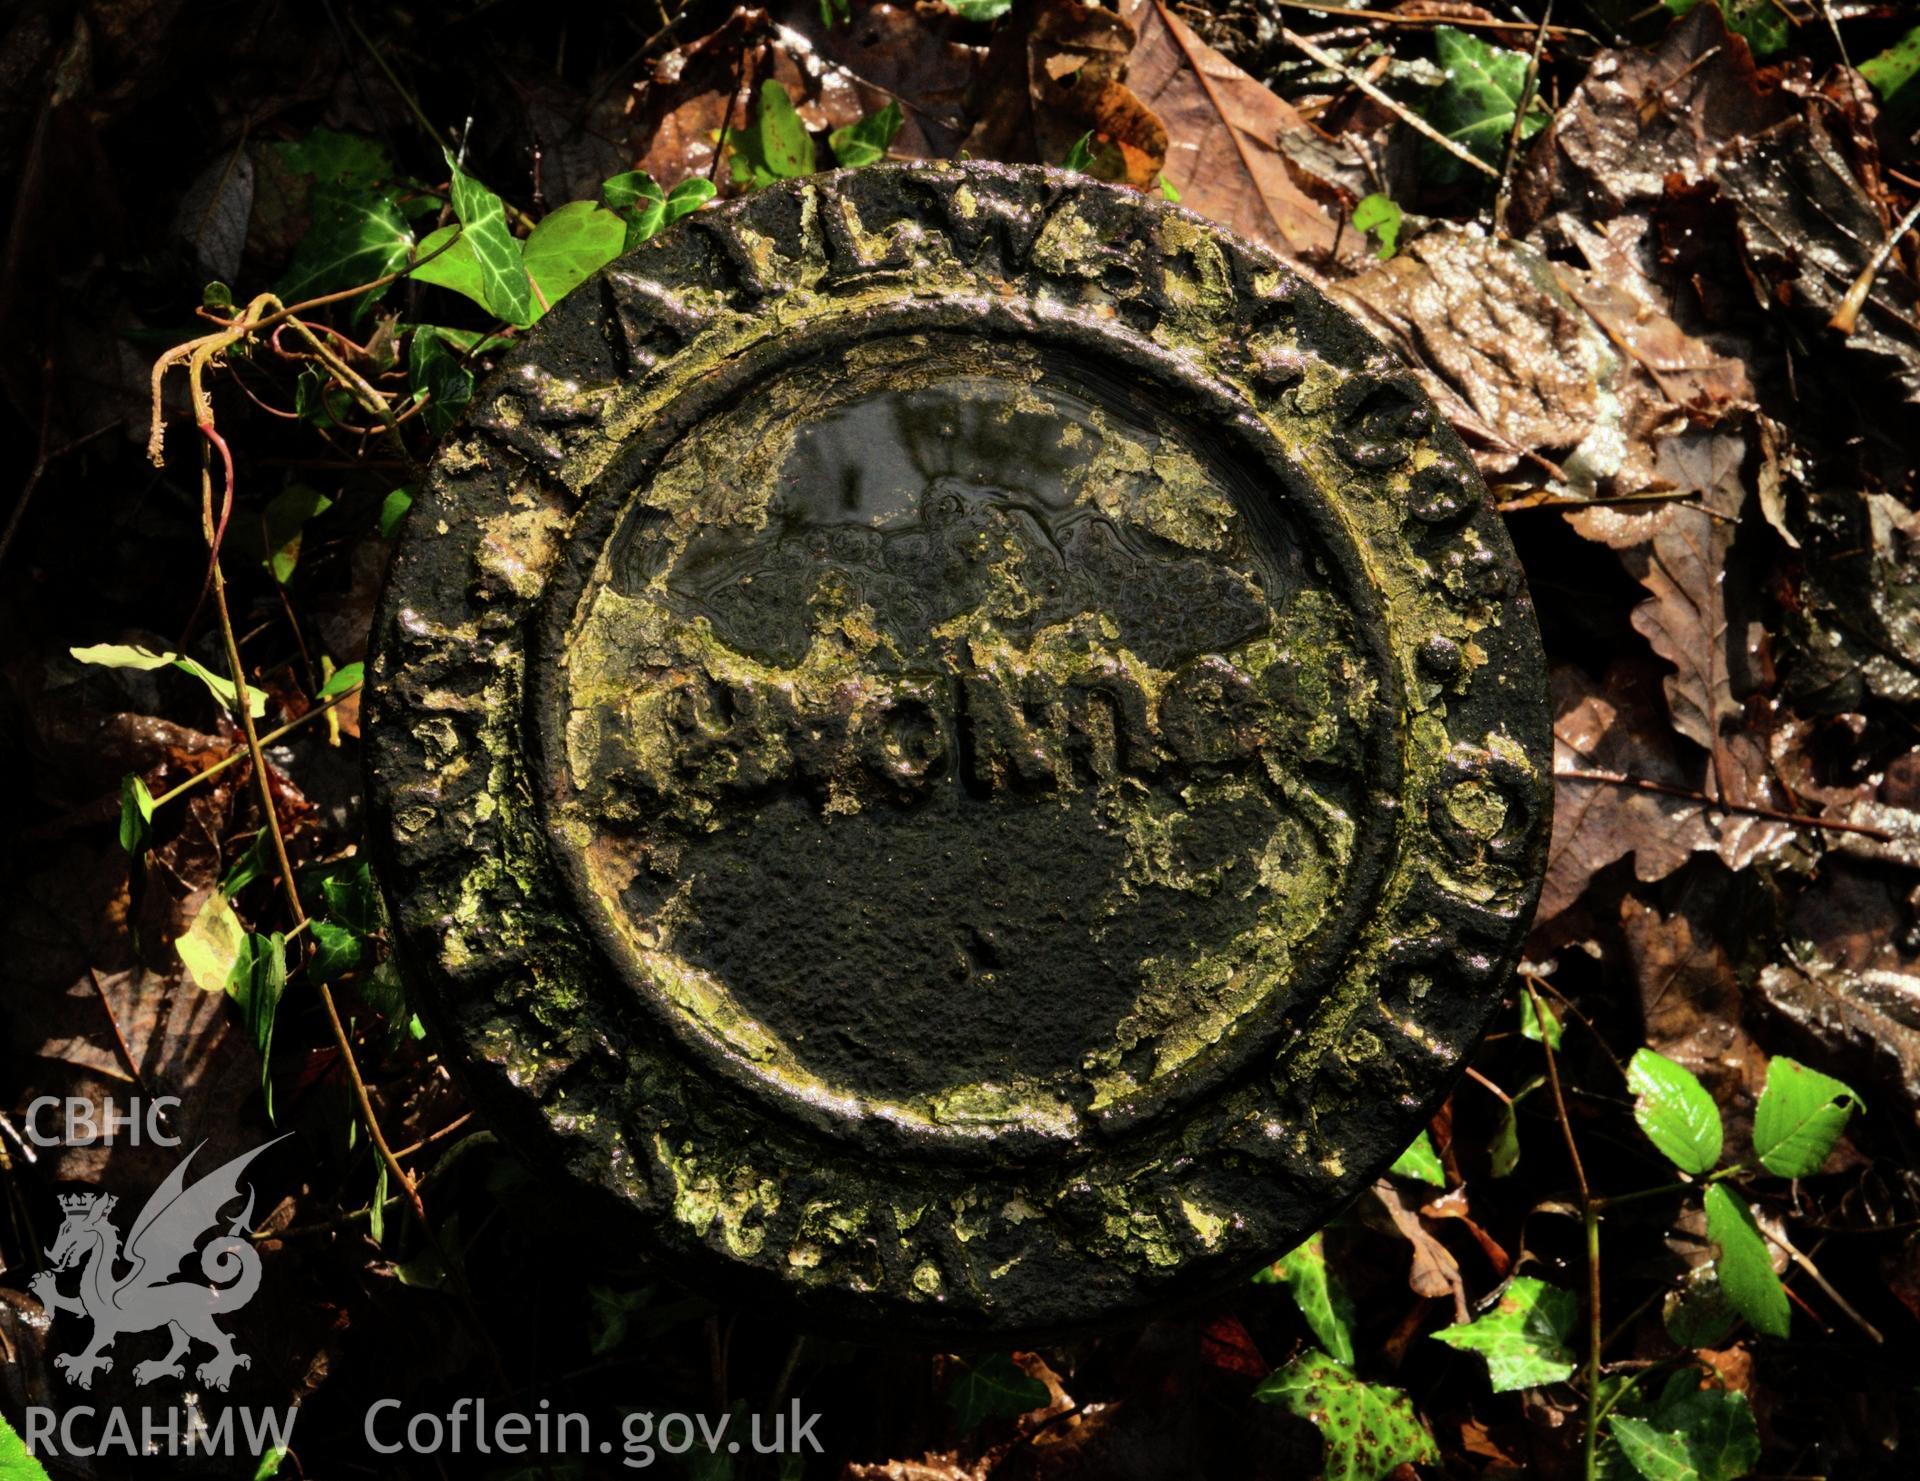 Colour photo showing one of the northern boundary markers, taken by Mark Evans, January 2017.